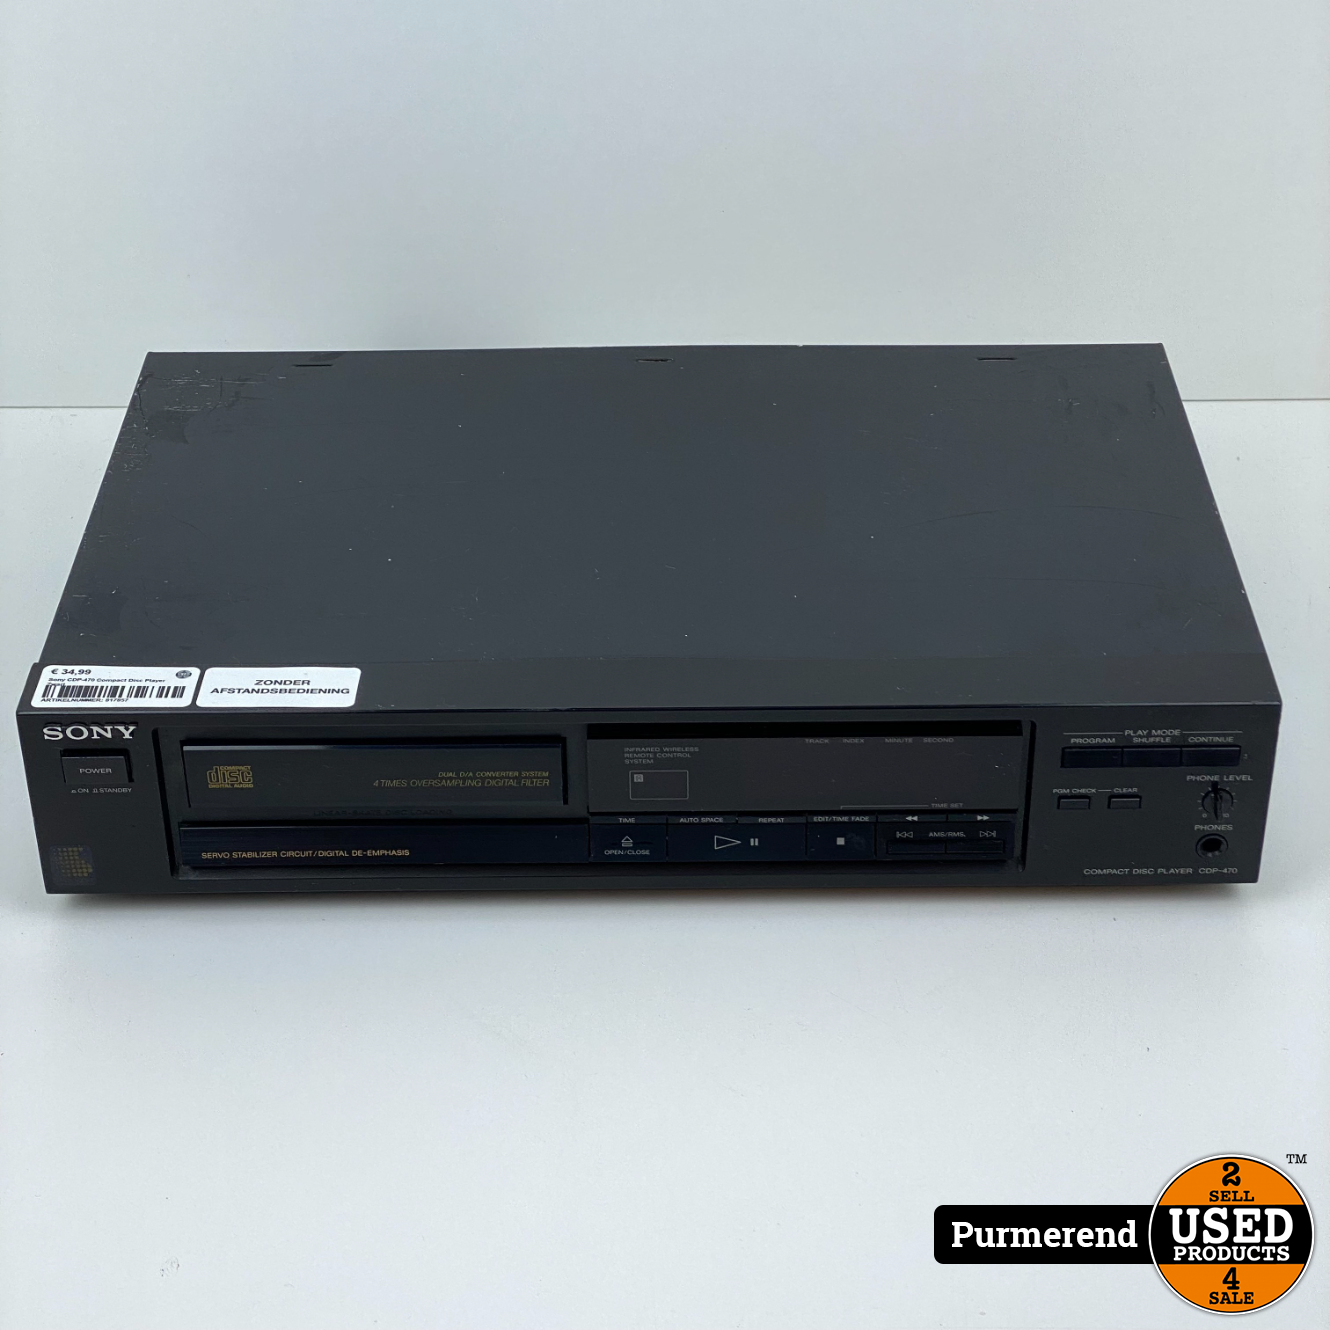 Verzending Misleidend Continent Sony CDP-470 Compact Disc Player Zwart - Used Products Purmerend